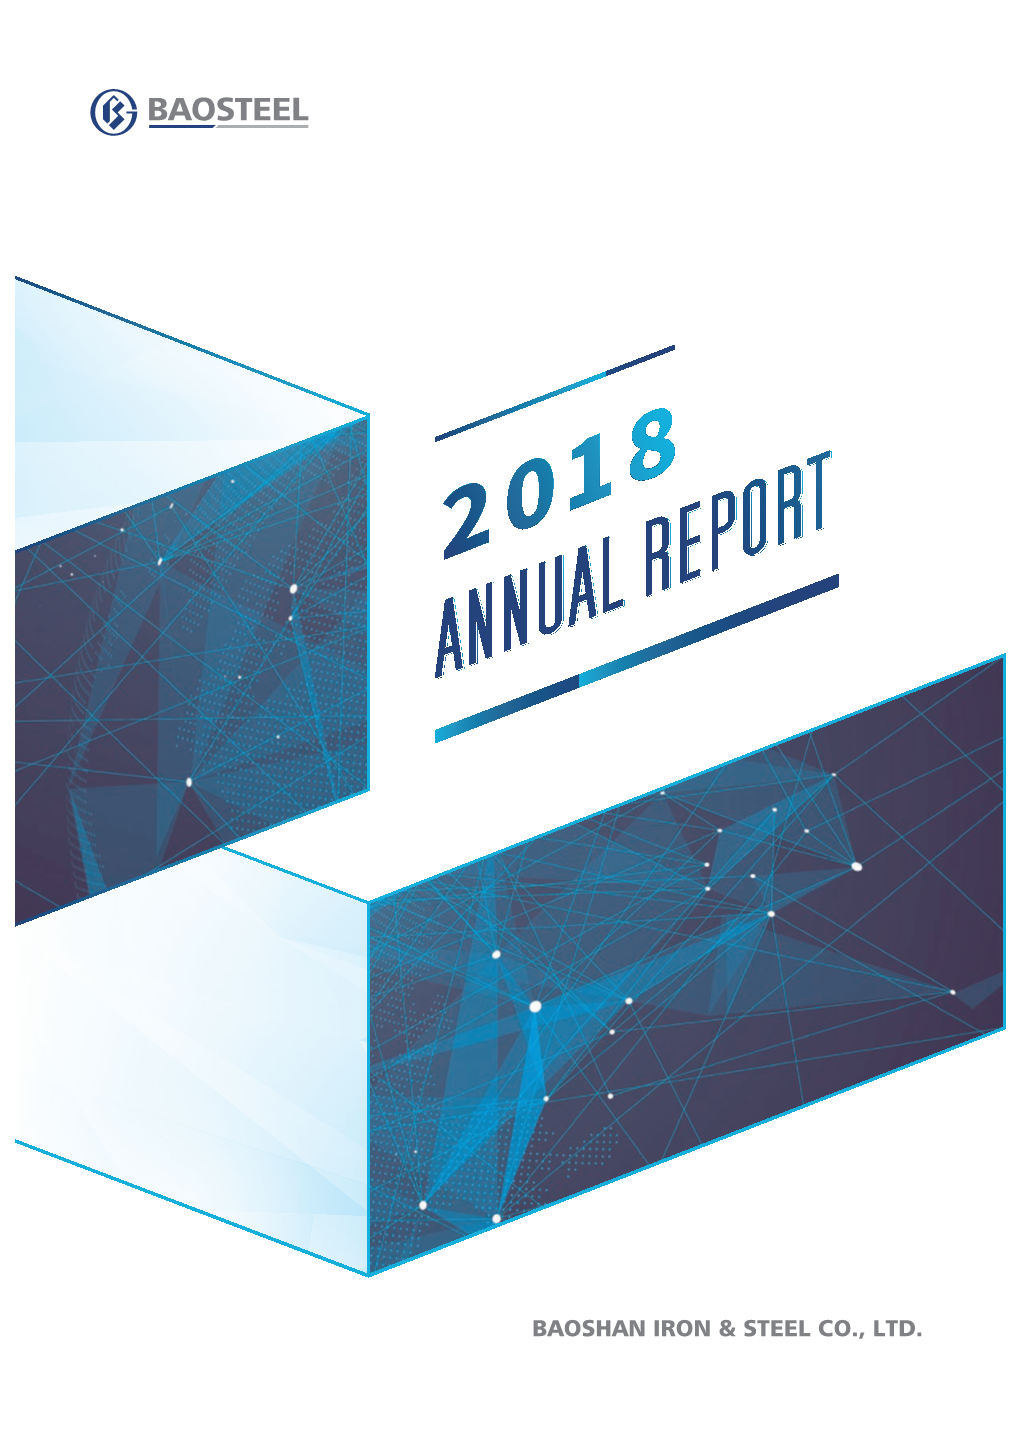 Illustration in One Picture 2018 Annual Report of Baosteel